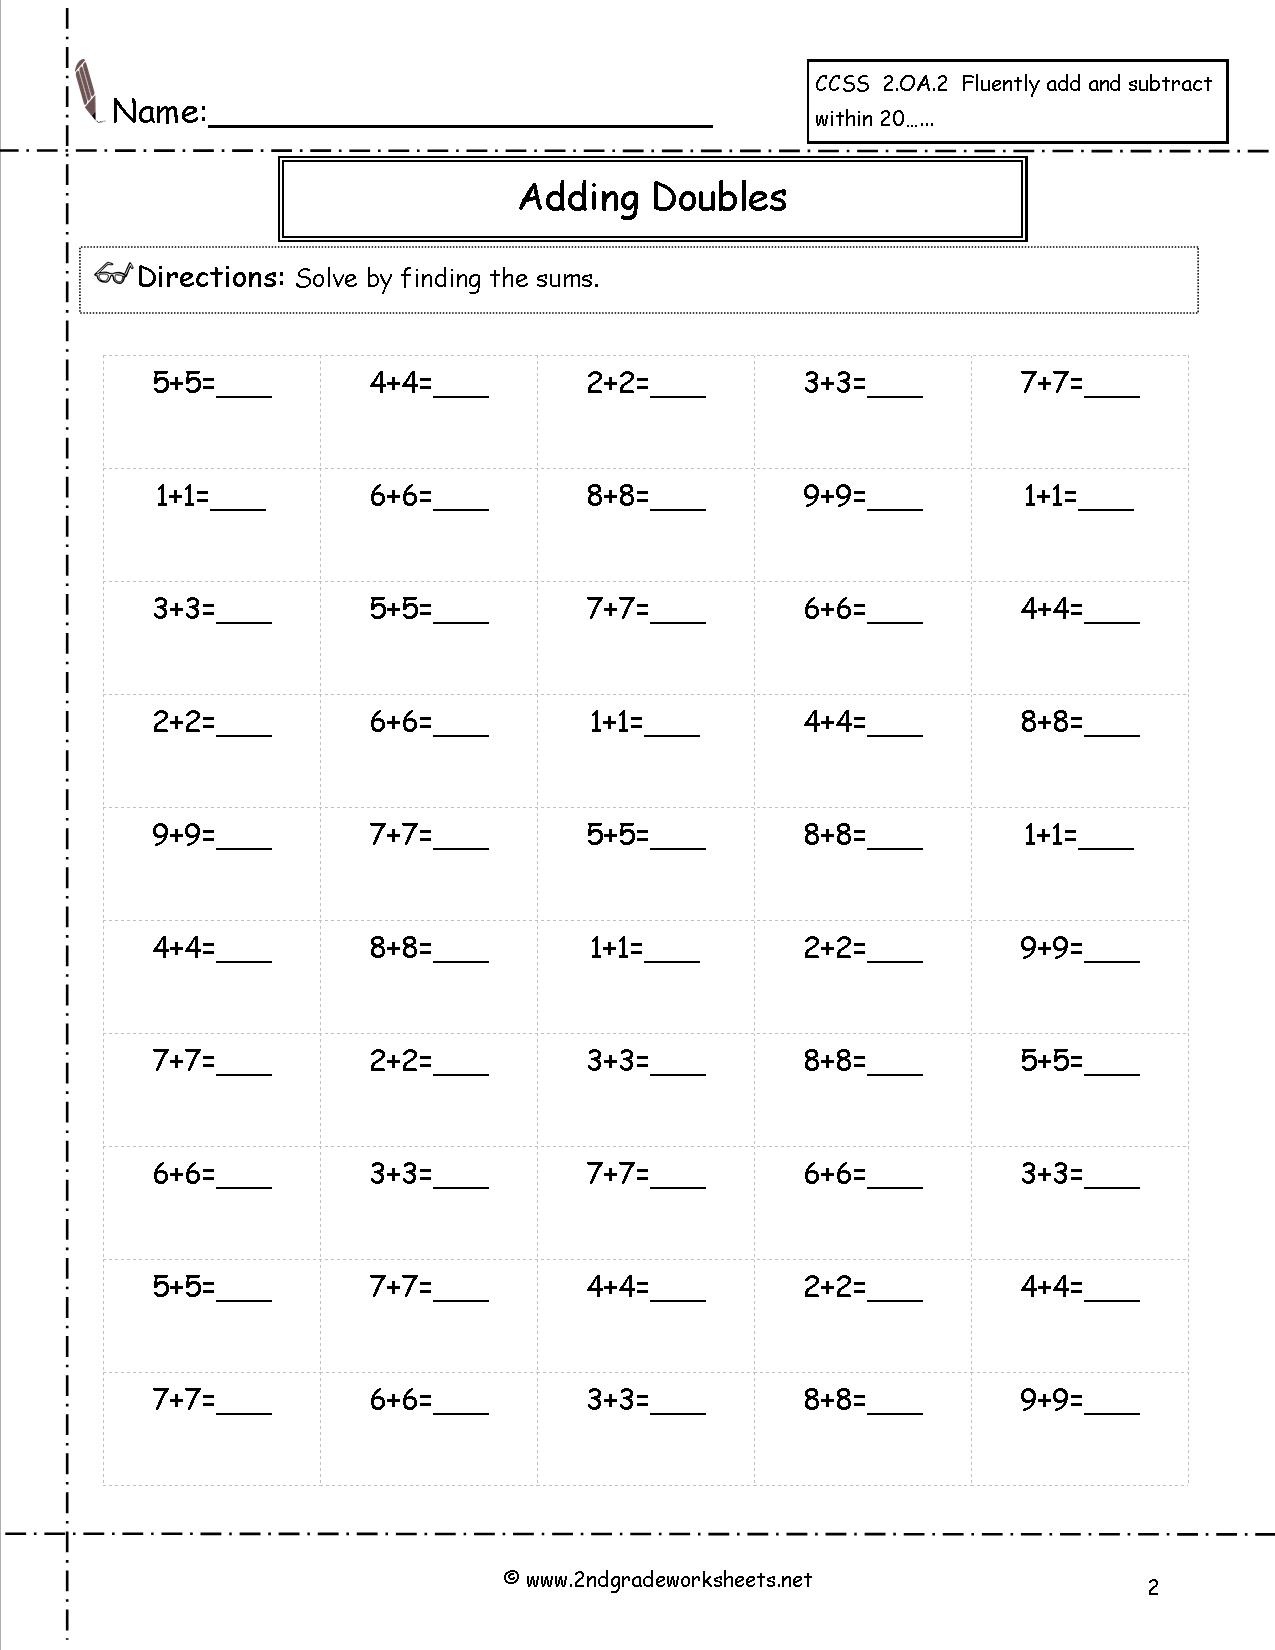 Free Math Worksheets And Printouts - Free Printable Addition And Subtraction Worksheets